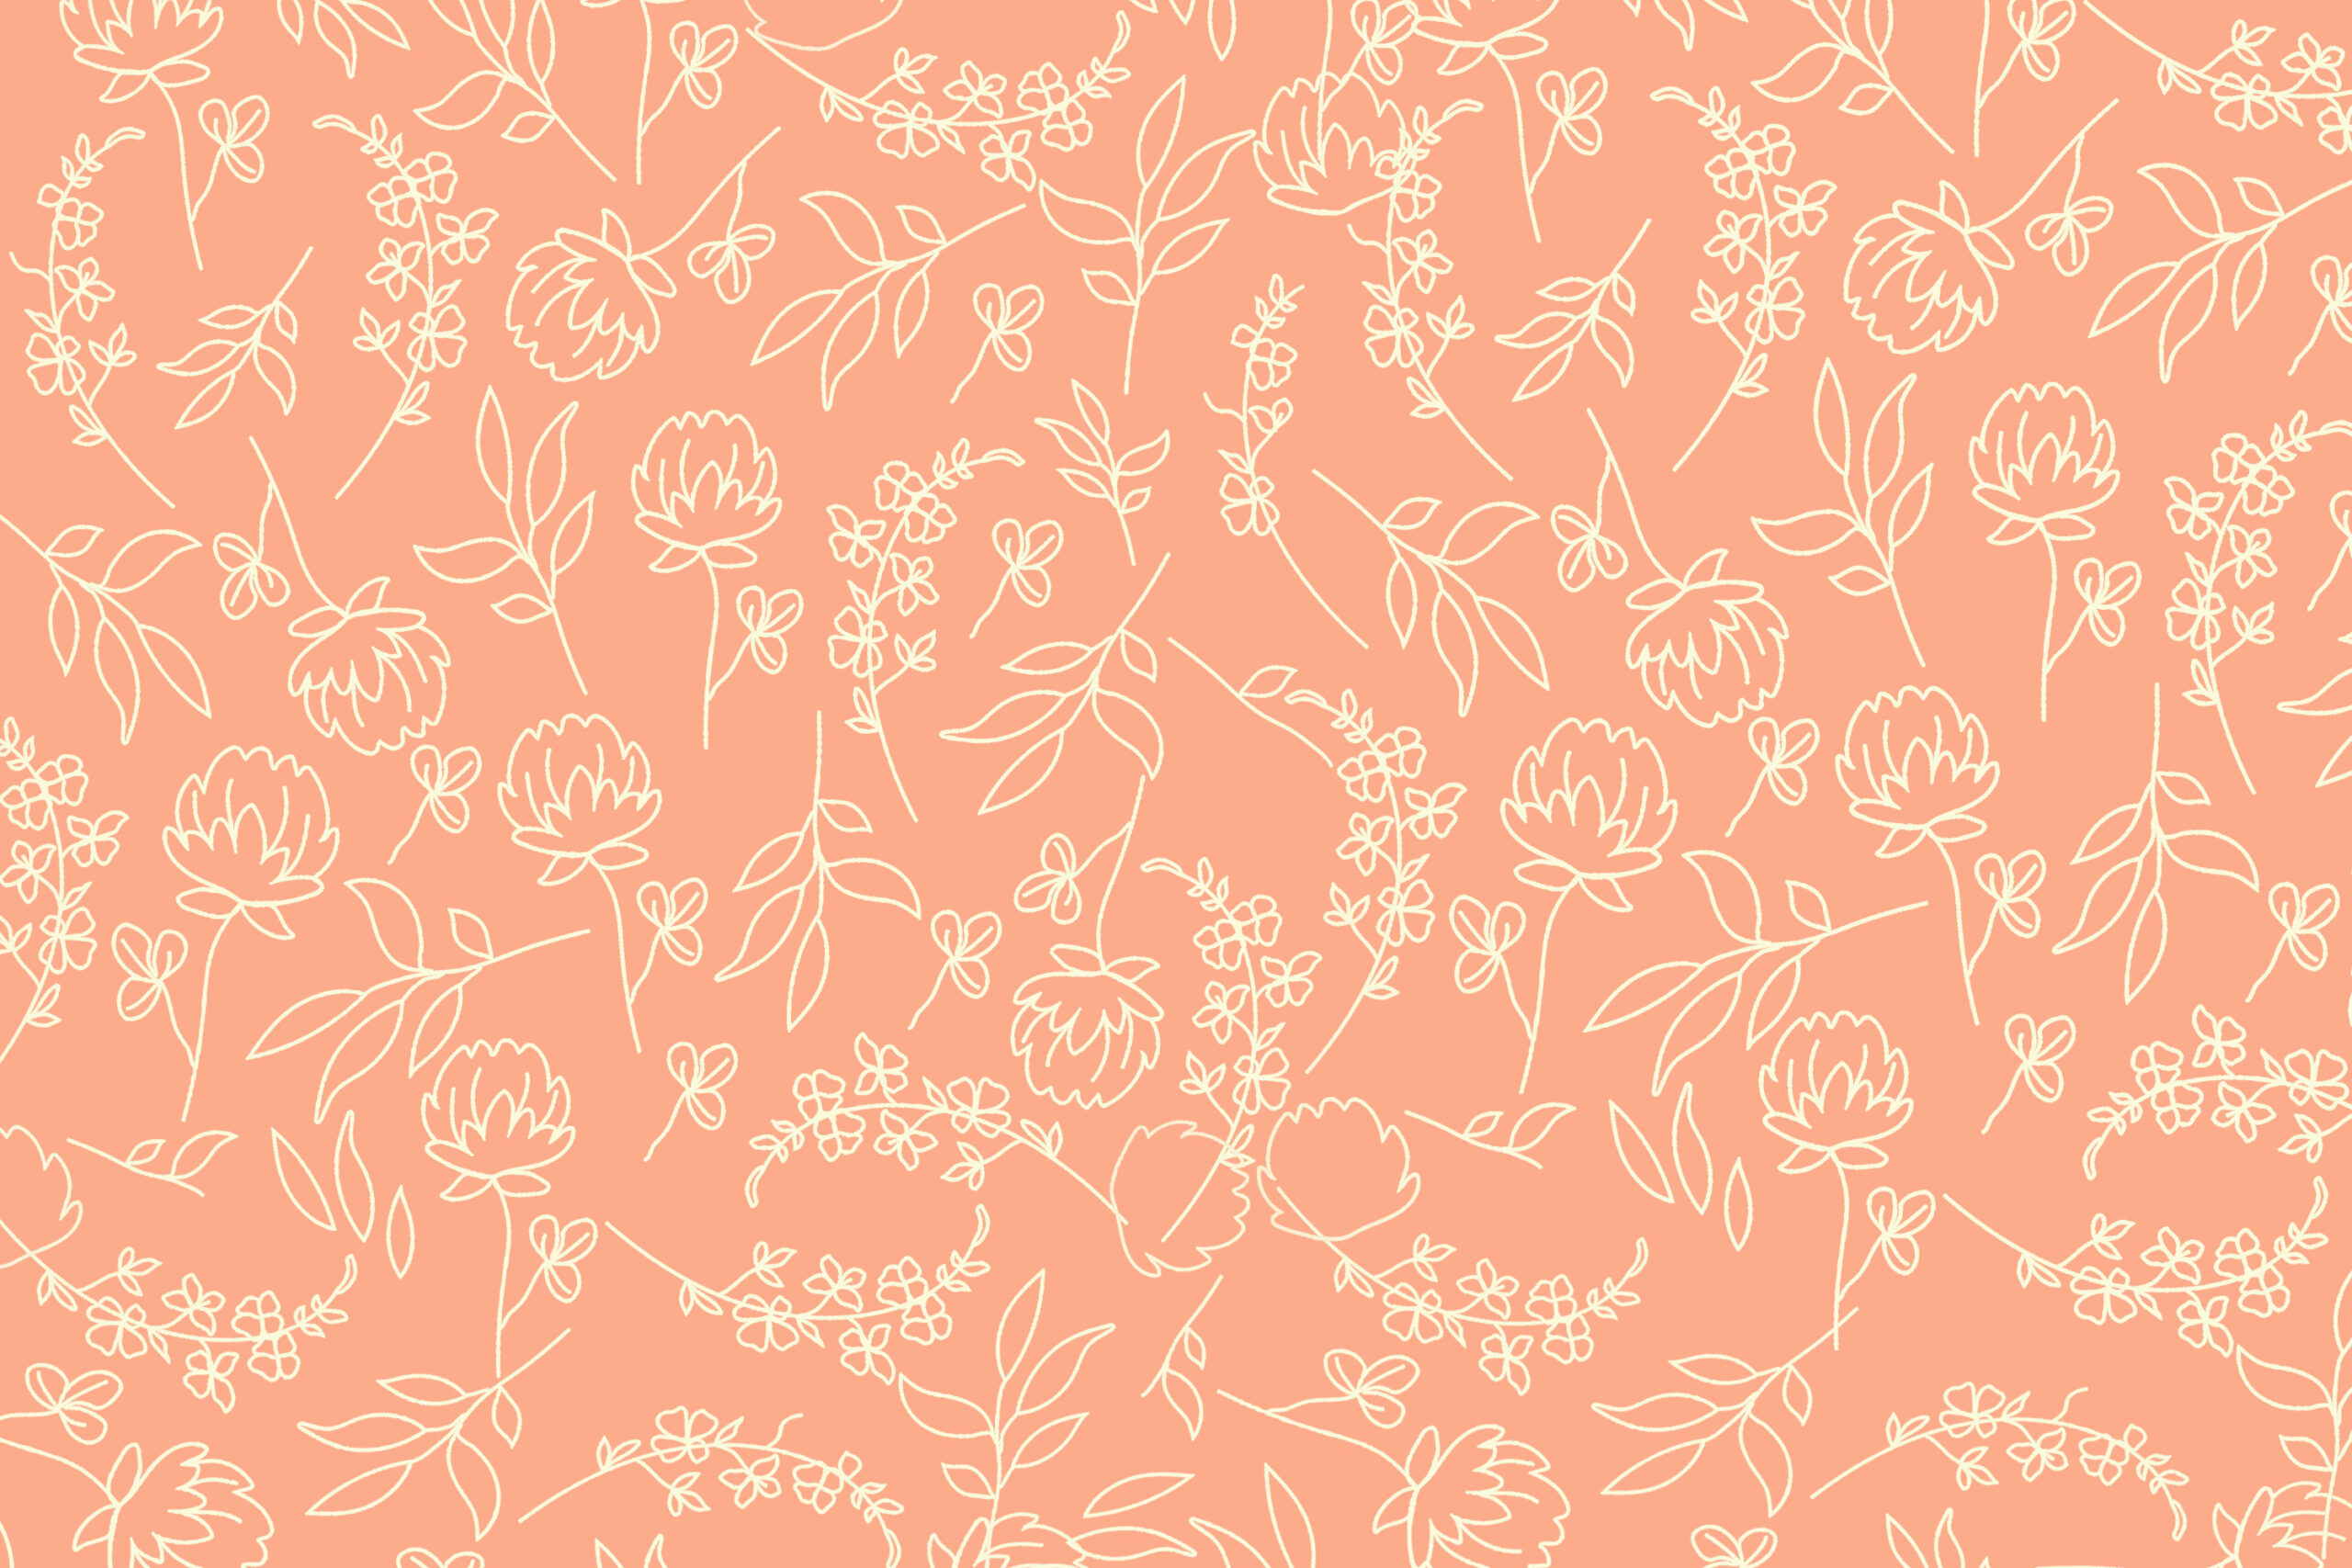 Floral Aesthetic Patterns